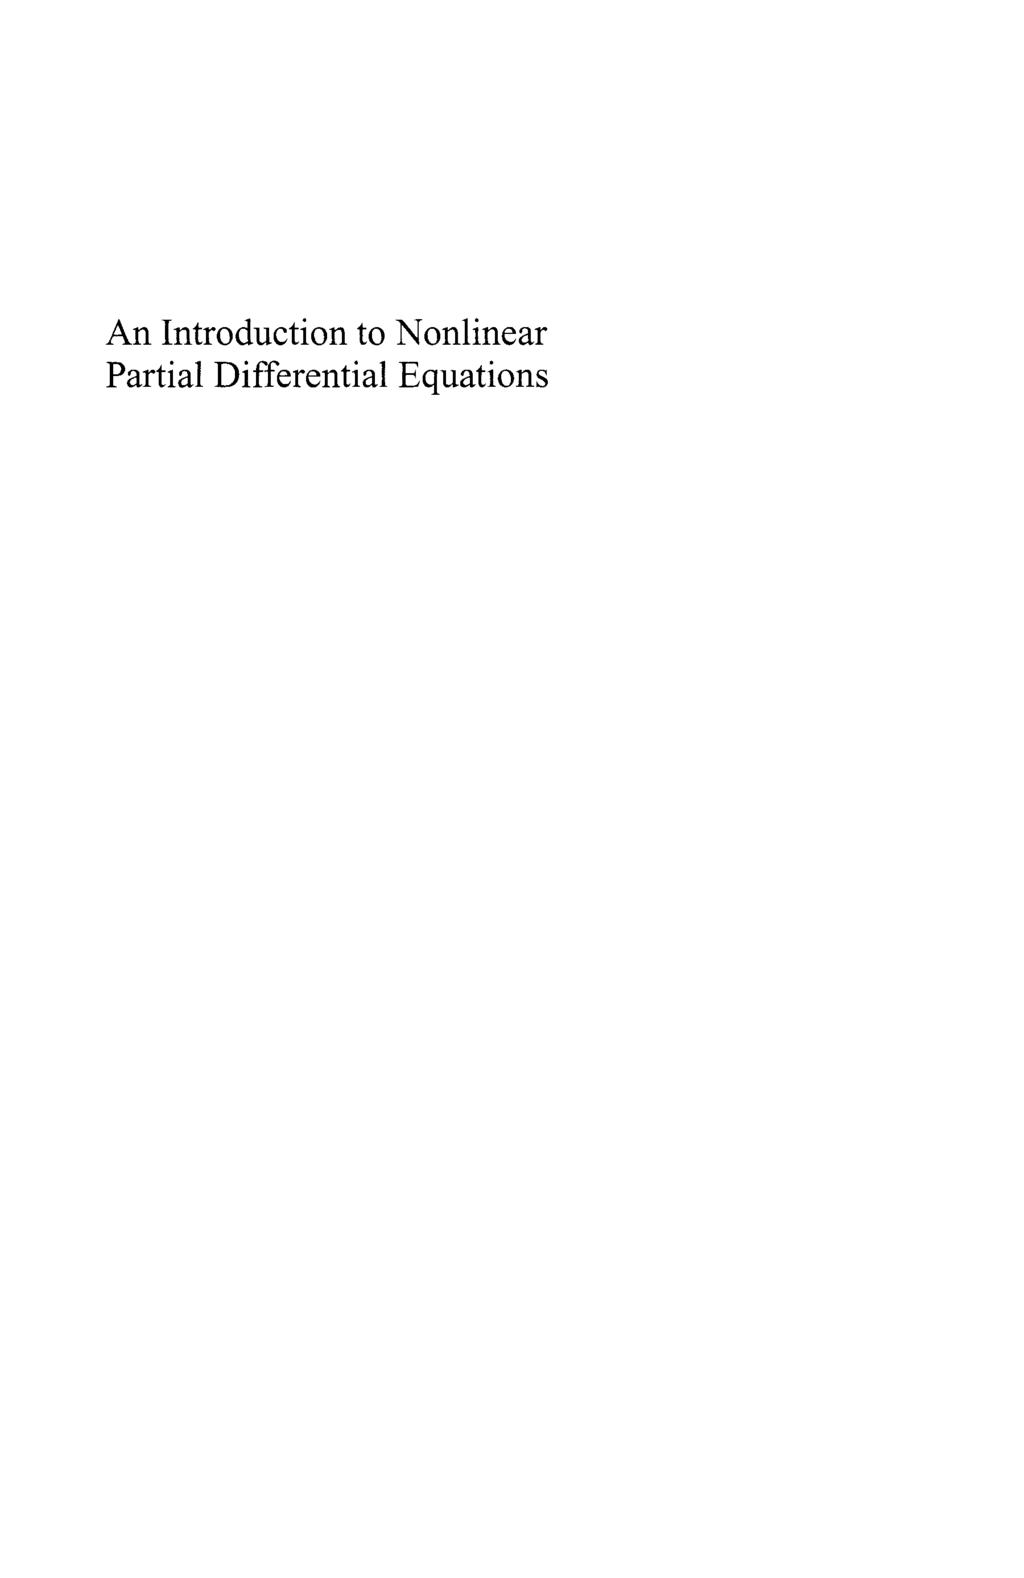 An Introduction to Nonlinear